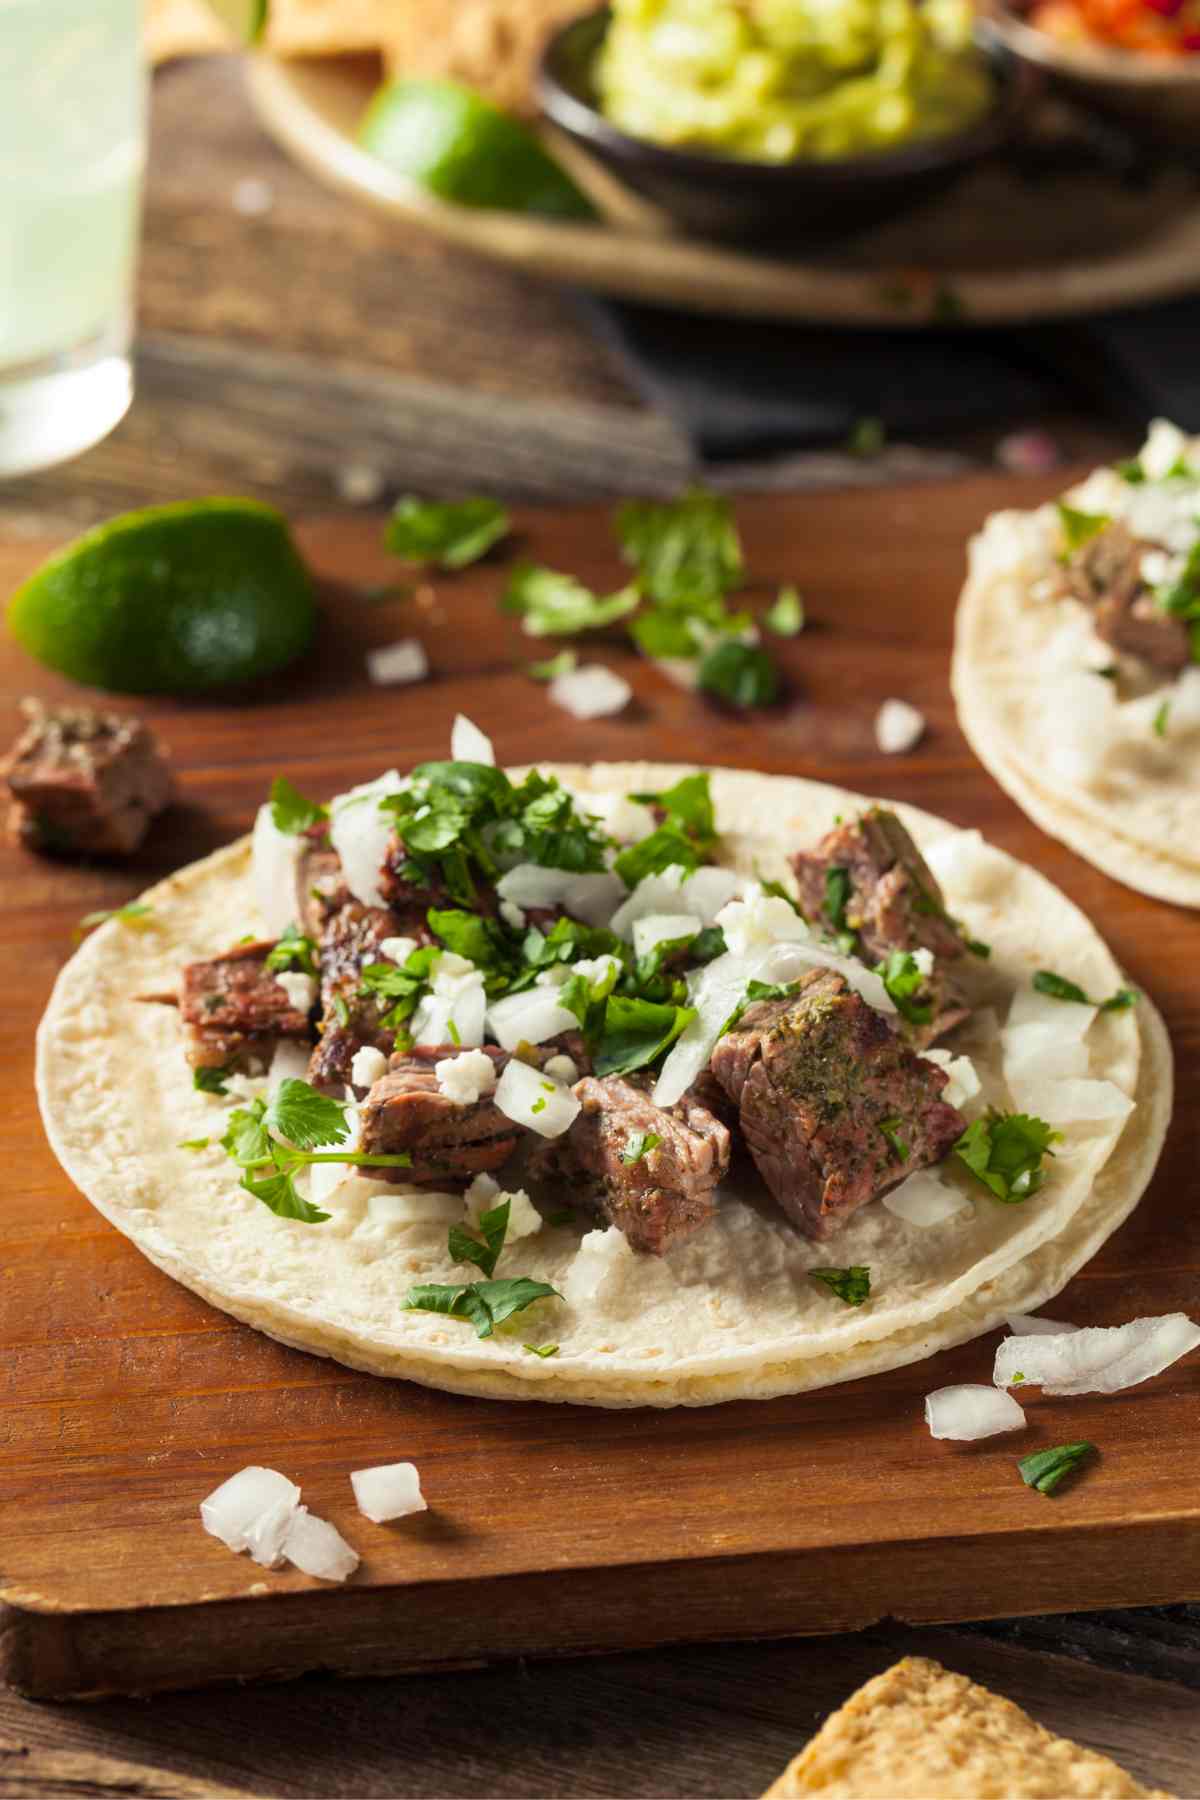 Marinated Skirt Steak Tacos are tender, juicy and flavorful. Also known as Carne Asada Tacos, this mouthwatering Mexican dish will have you going back for seconds. By combining the marinated skirt steak with delicious toppings, these tacos are always a winner.